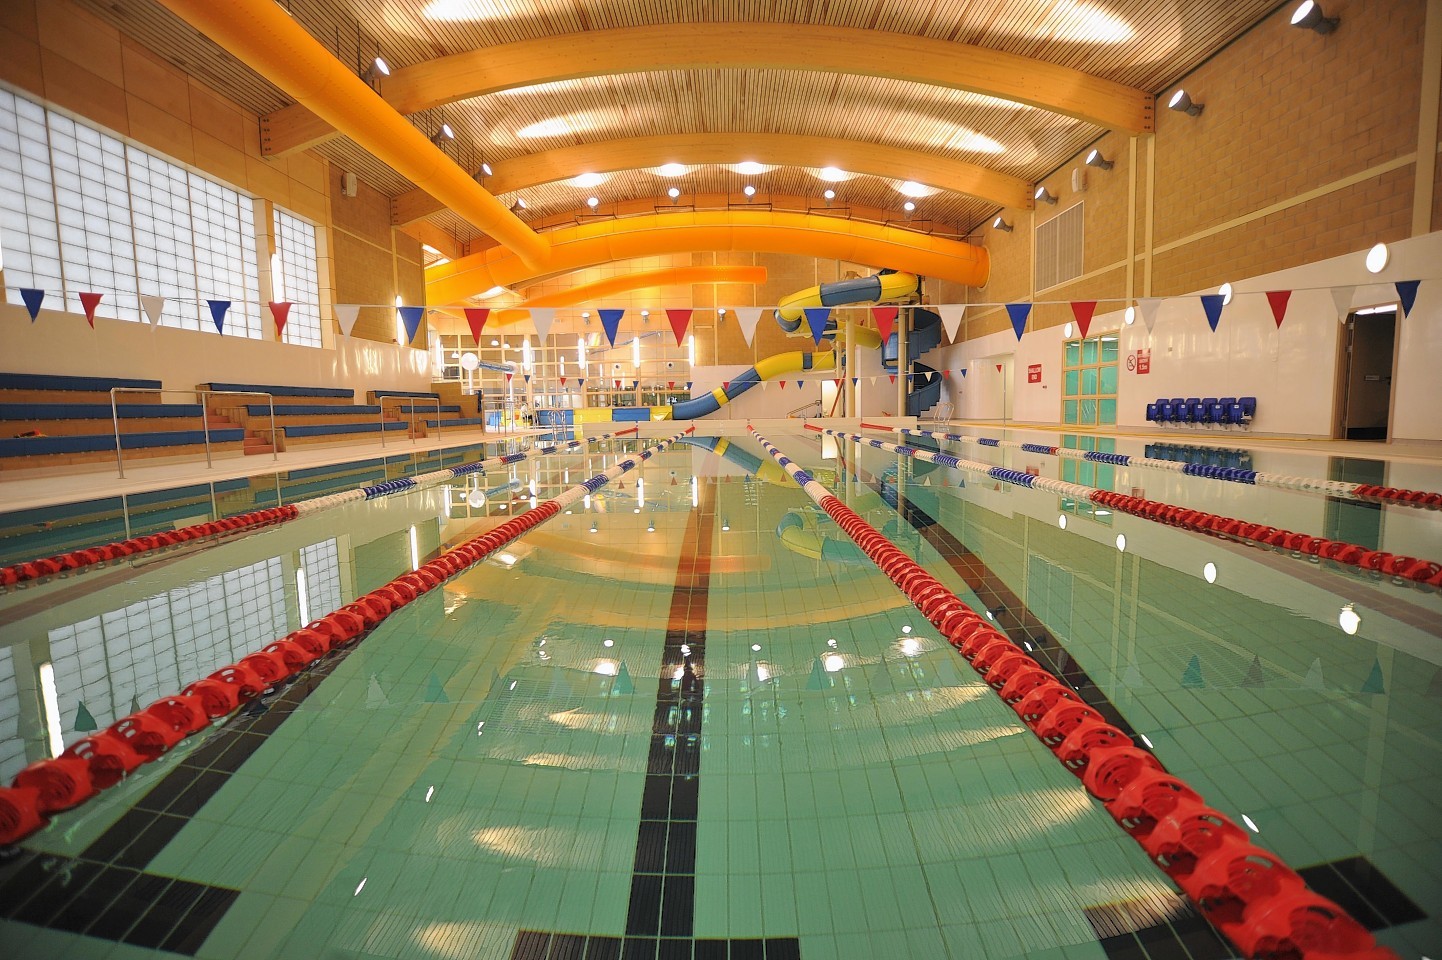 The council hopes the new parking bays will get more people into the pool